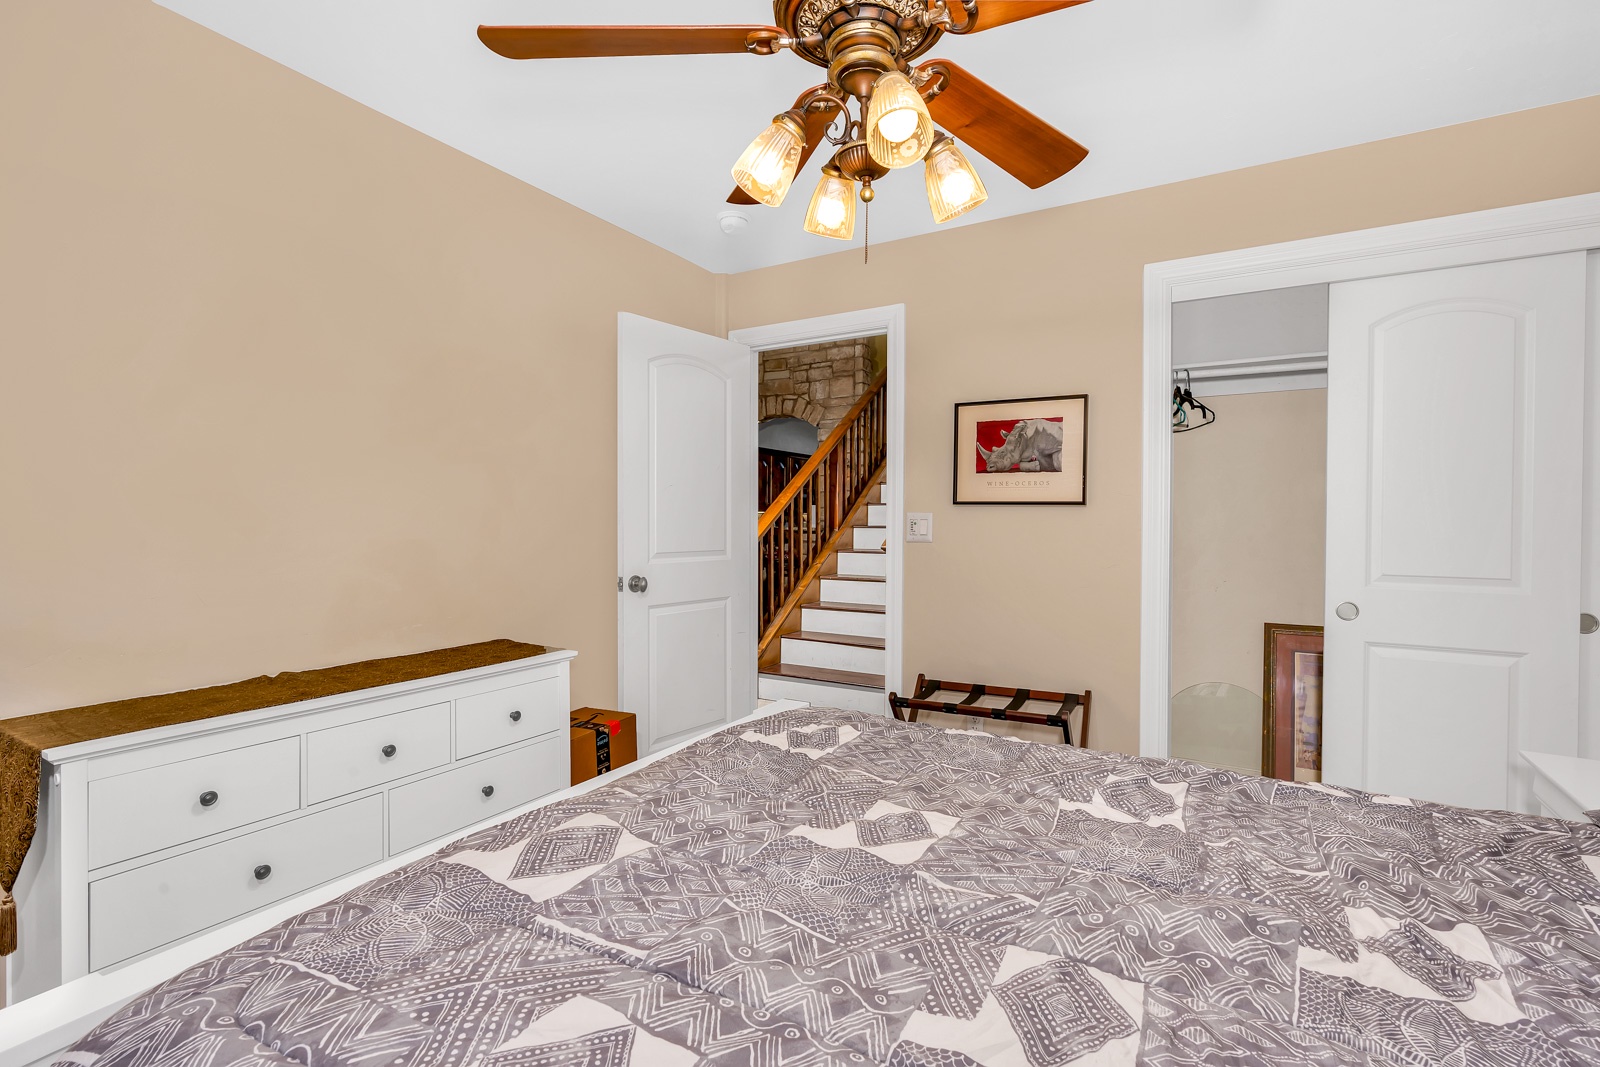 This 1st floor bedroom includes a queen bed, large closet, & ceiling fan